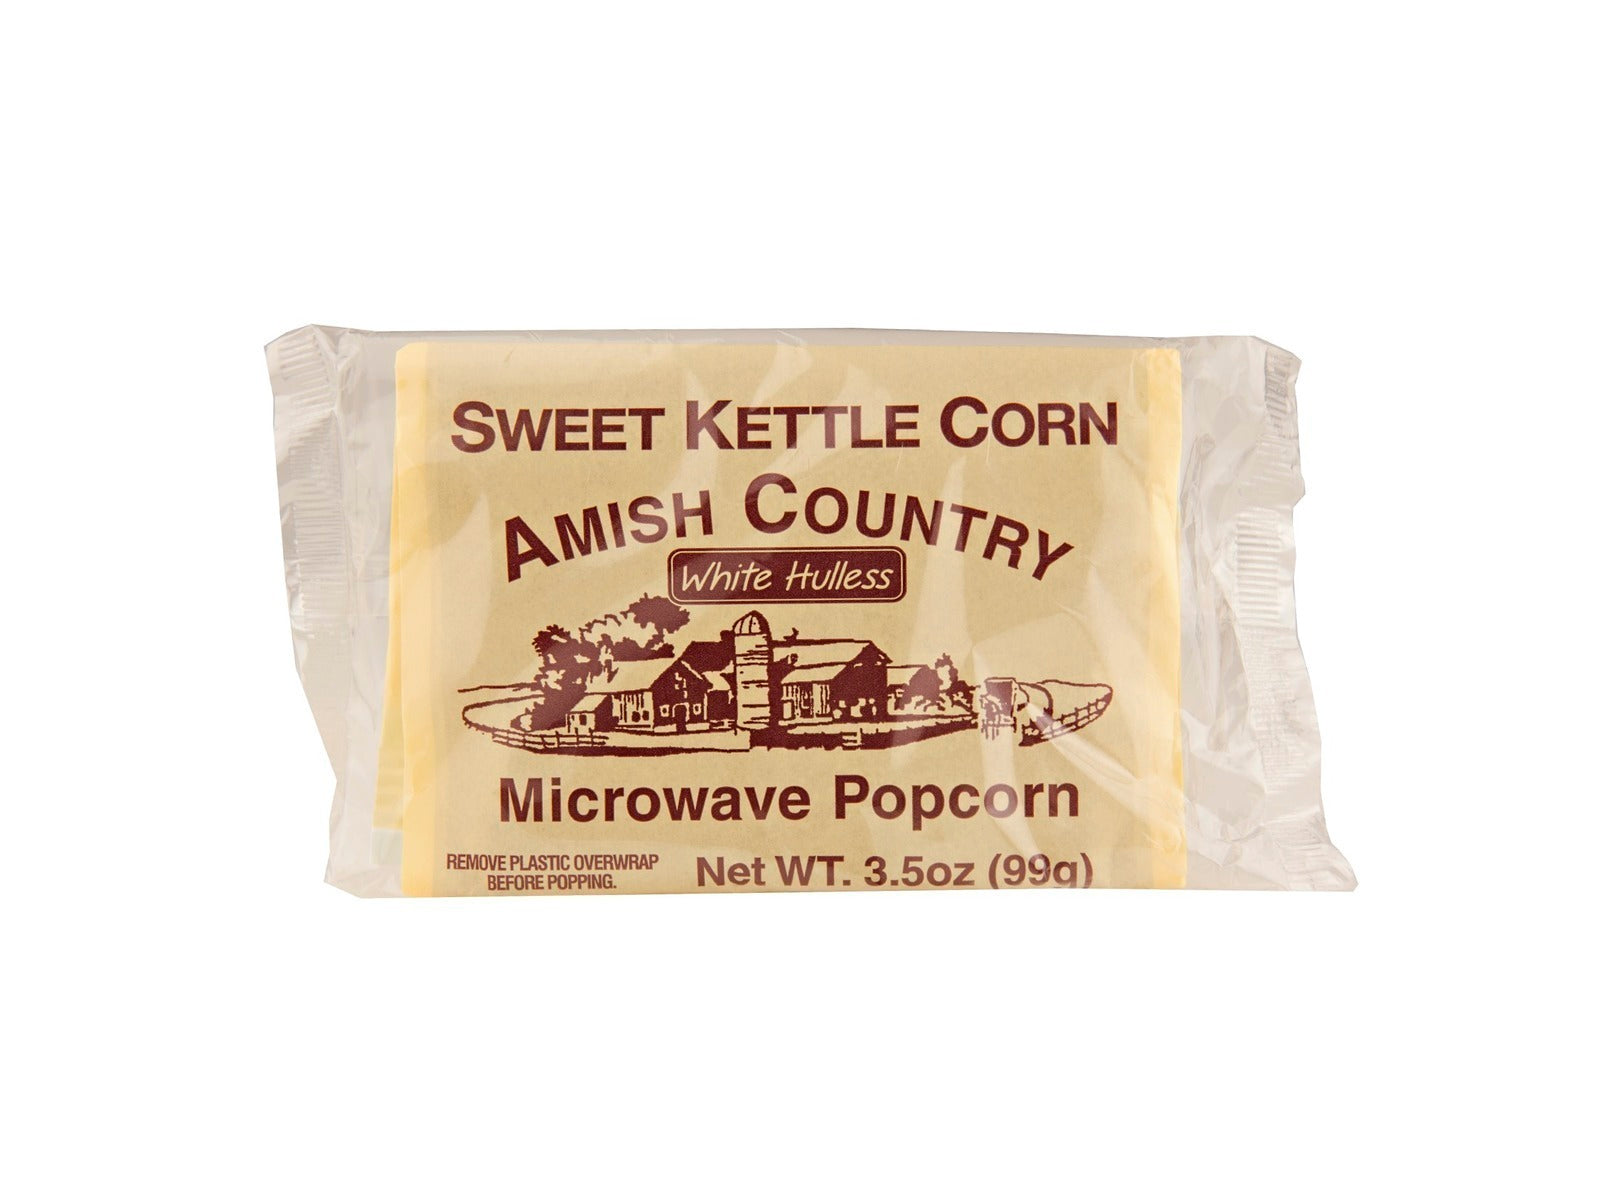 Amish Country Sweet Kettle Corn Microwave Popcorn 3.5 oz